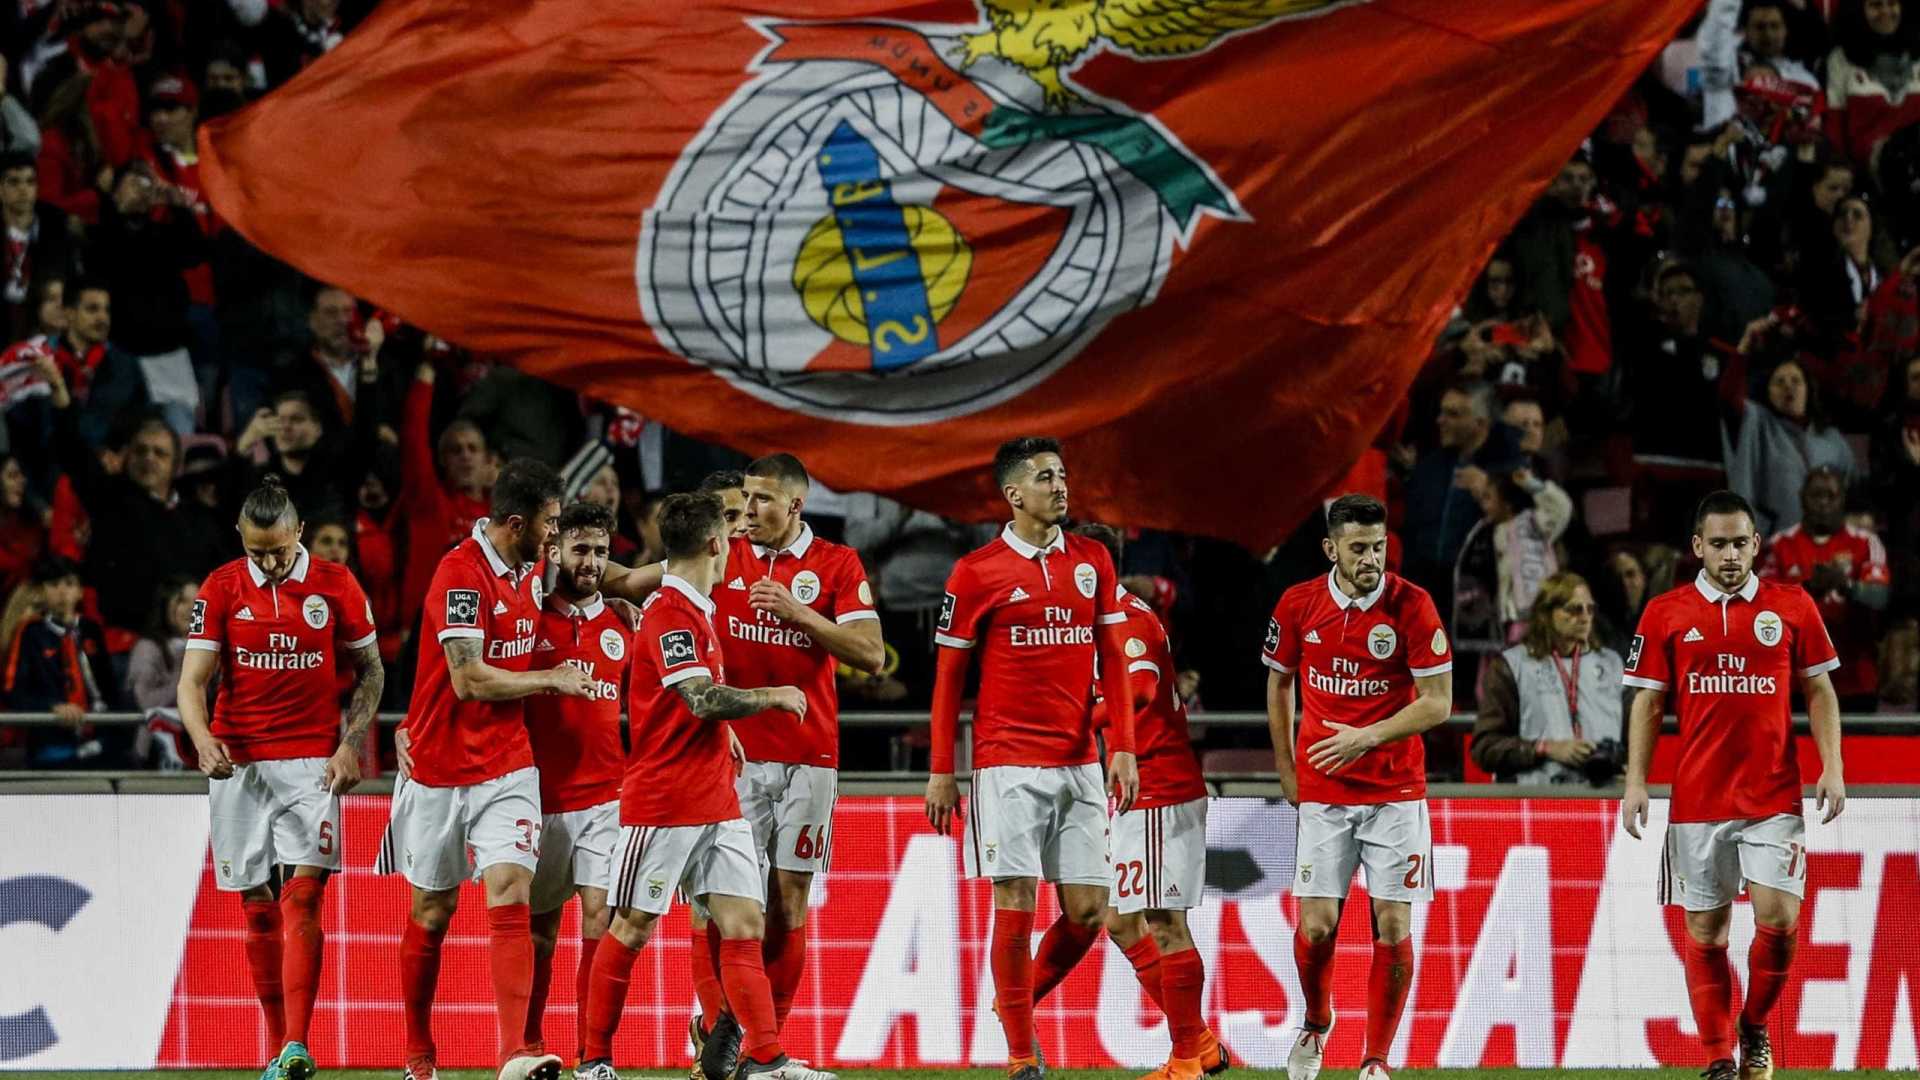 Benfica players | Global Images